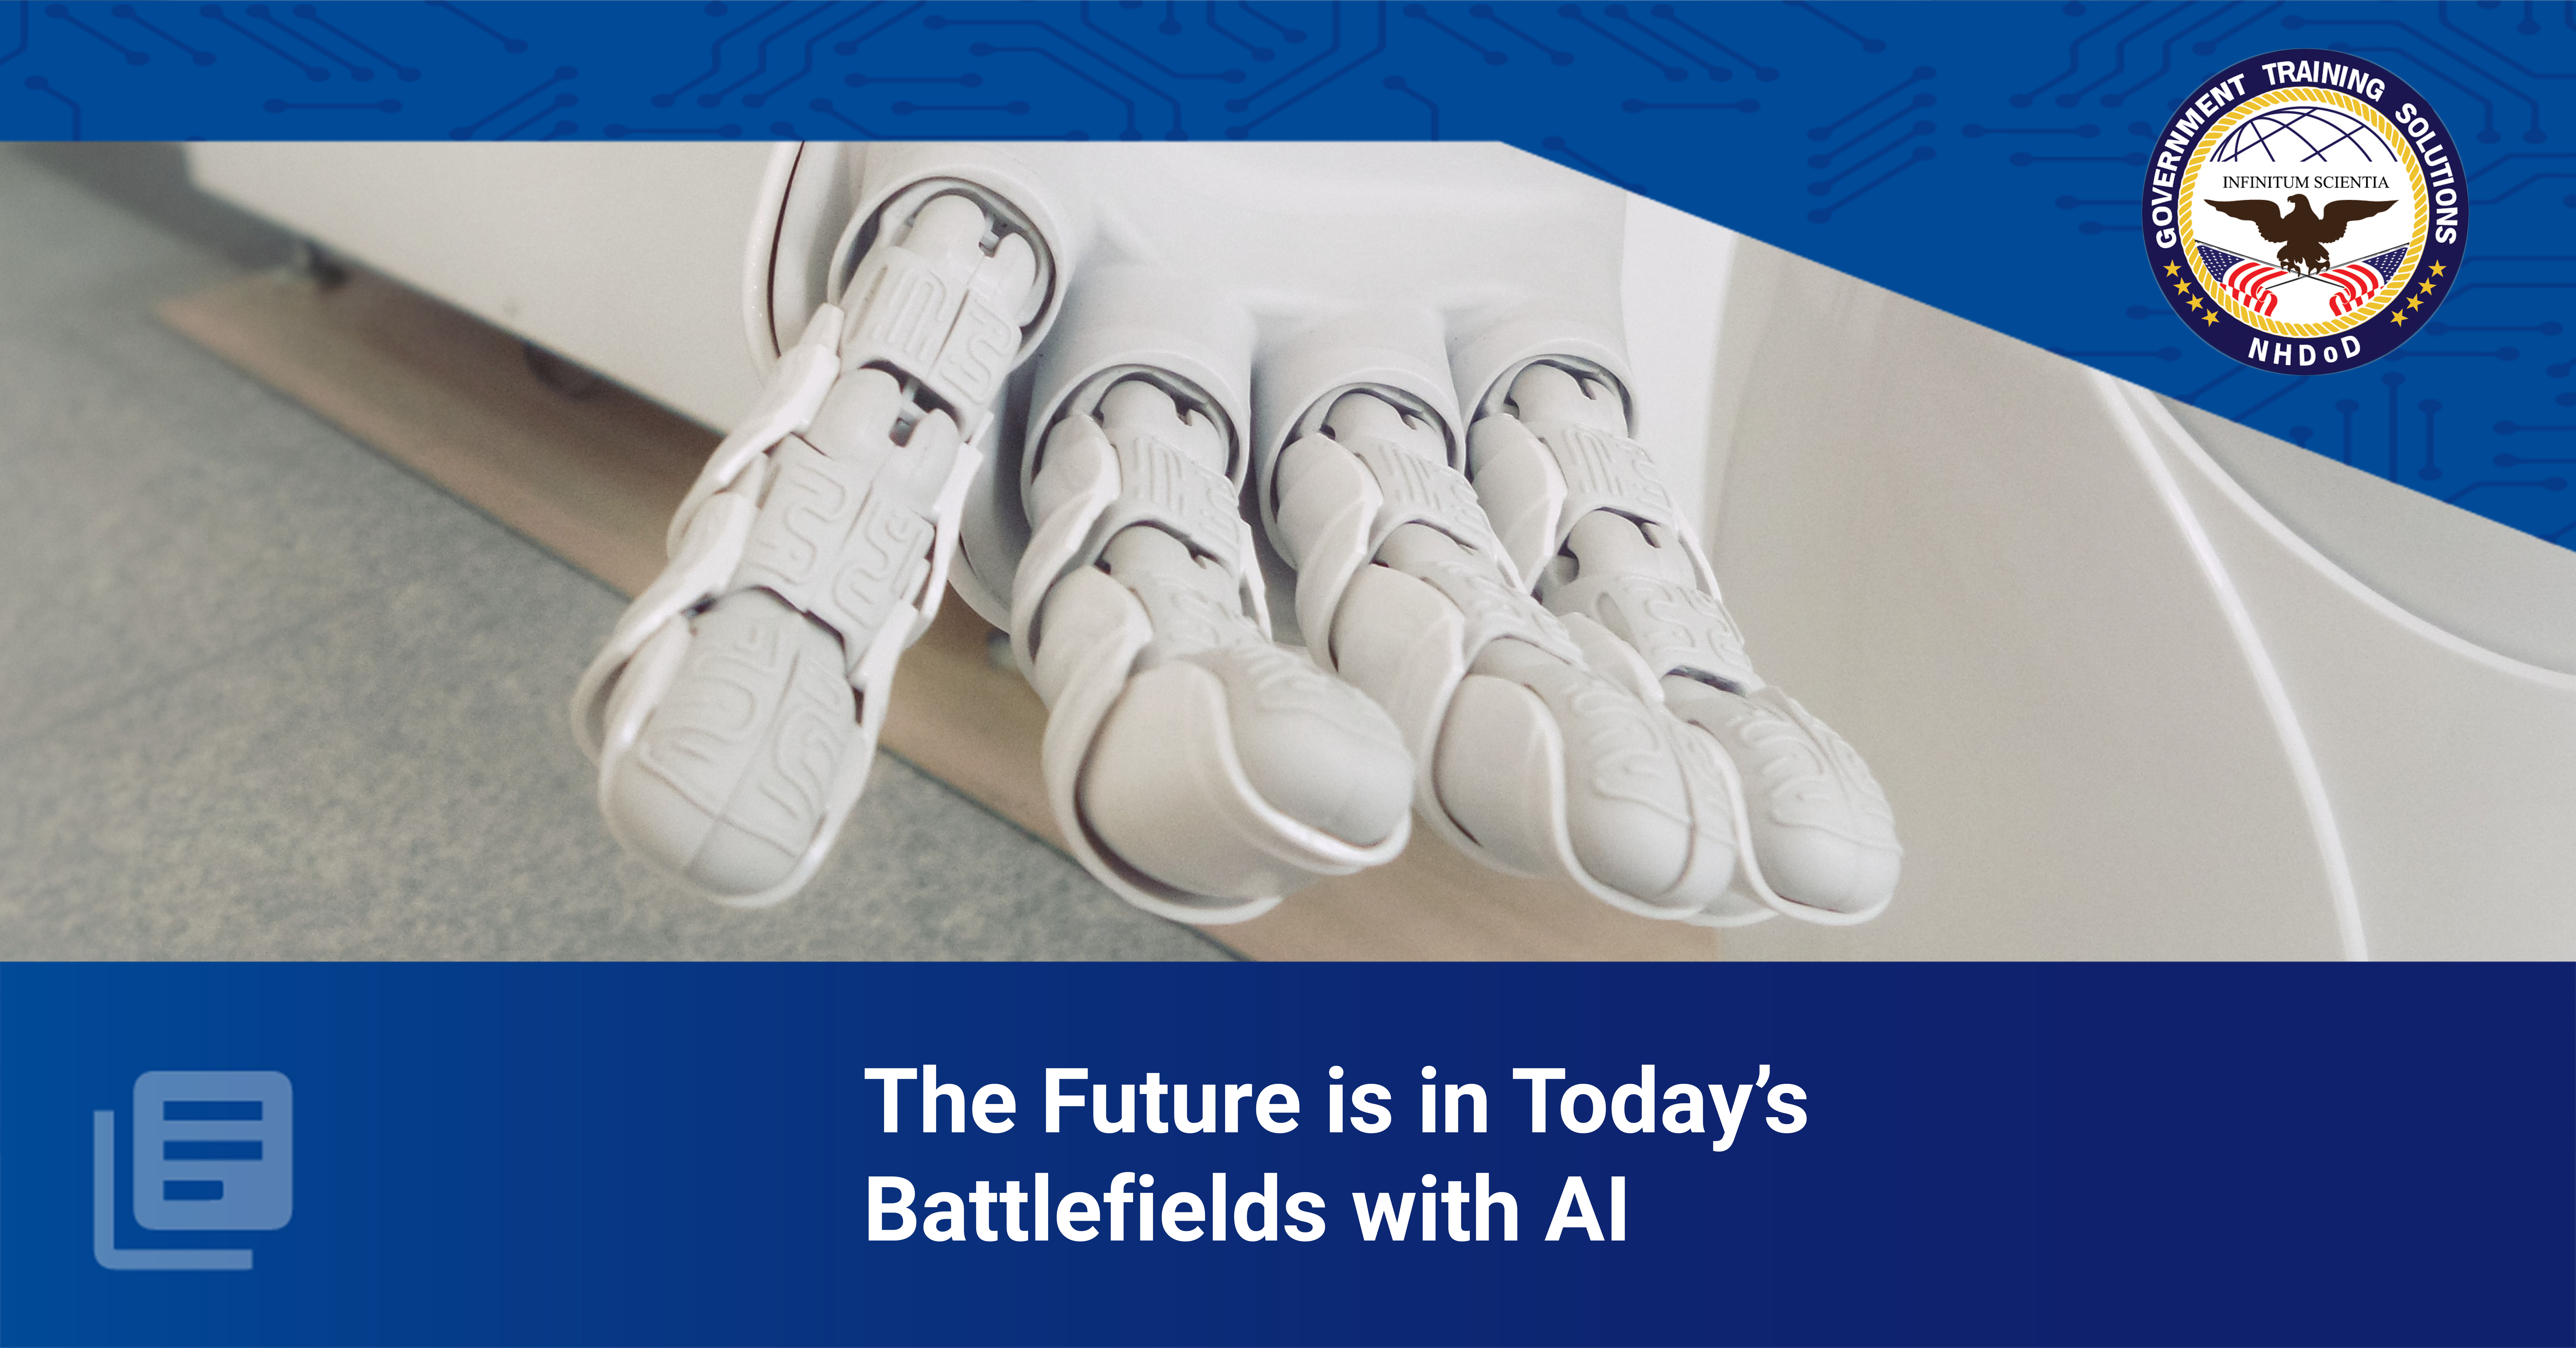 The Future is in Today’s Battlefields with AI